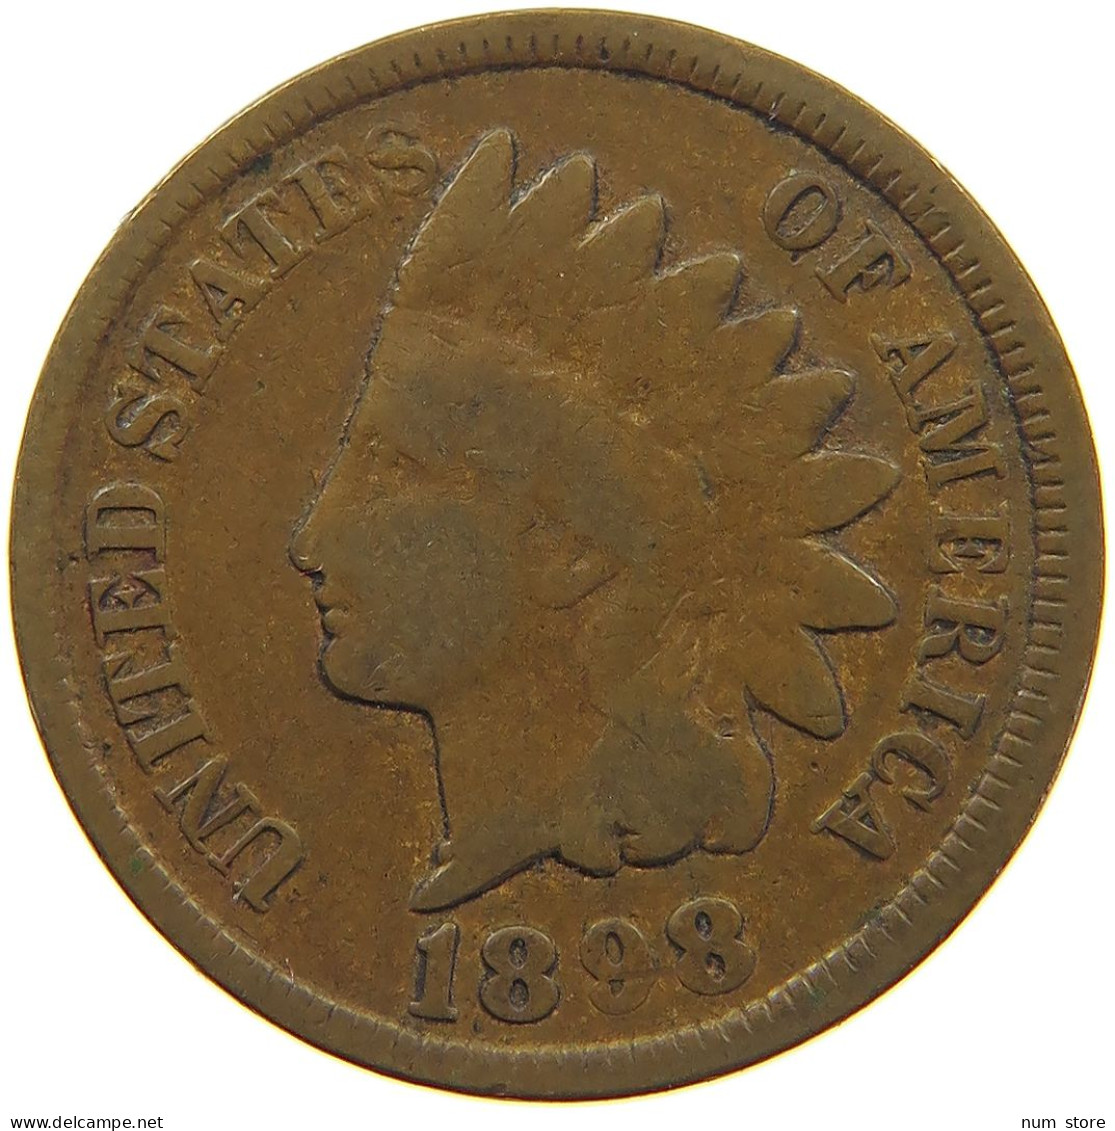 UNITED STATES OF AMERICA CENT 1898 INDIAN HEAD #c017 0347 - 1859-1909: Indian Head